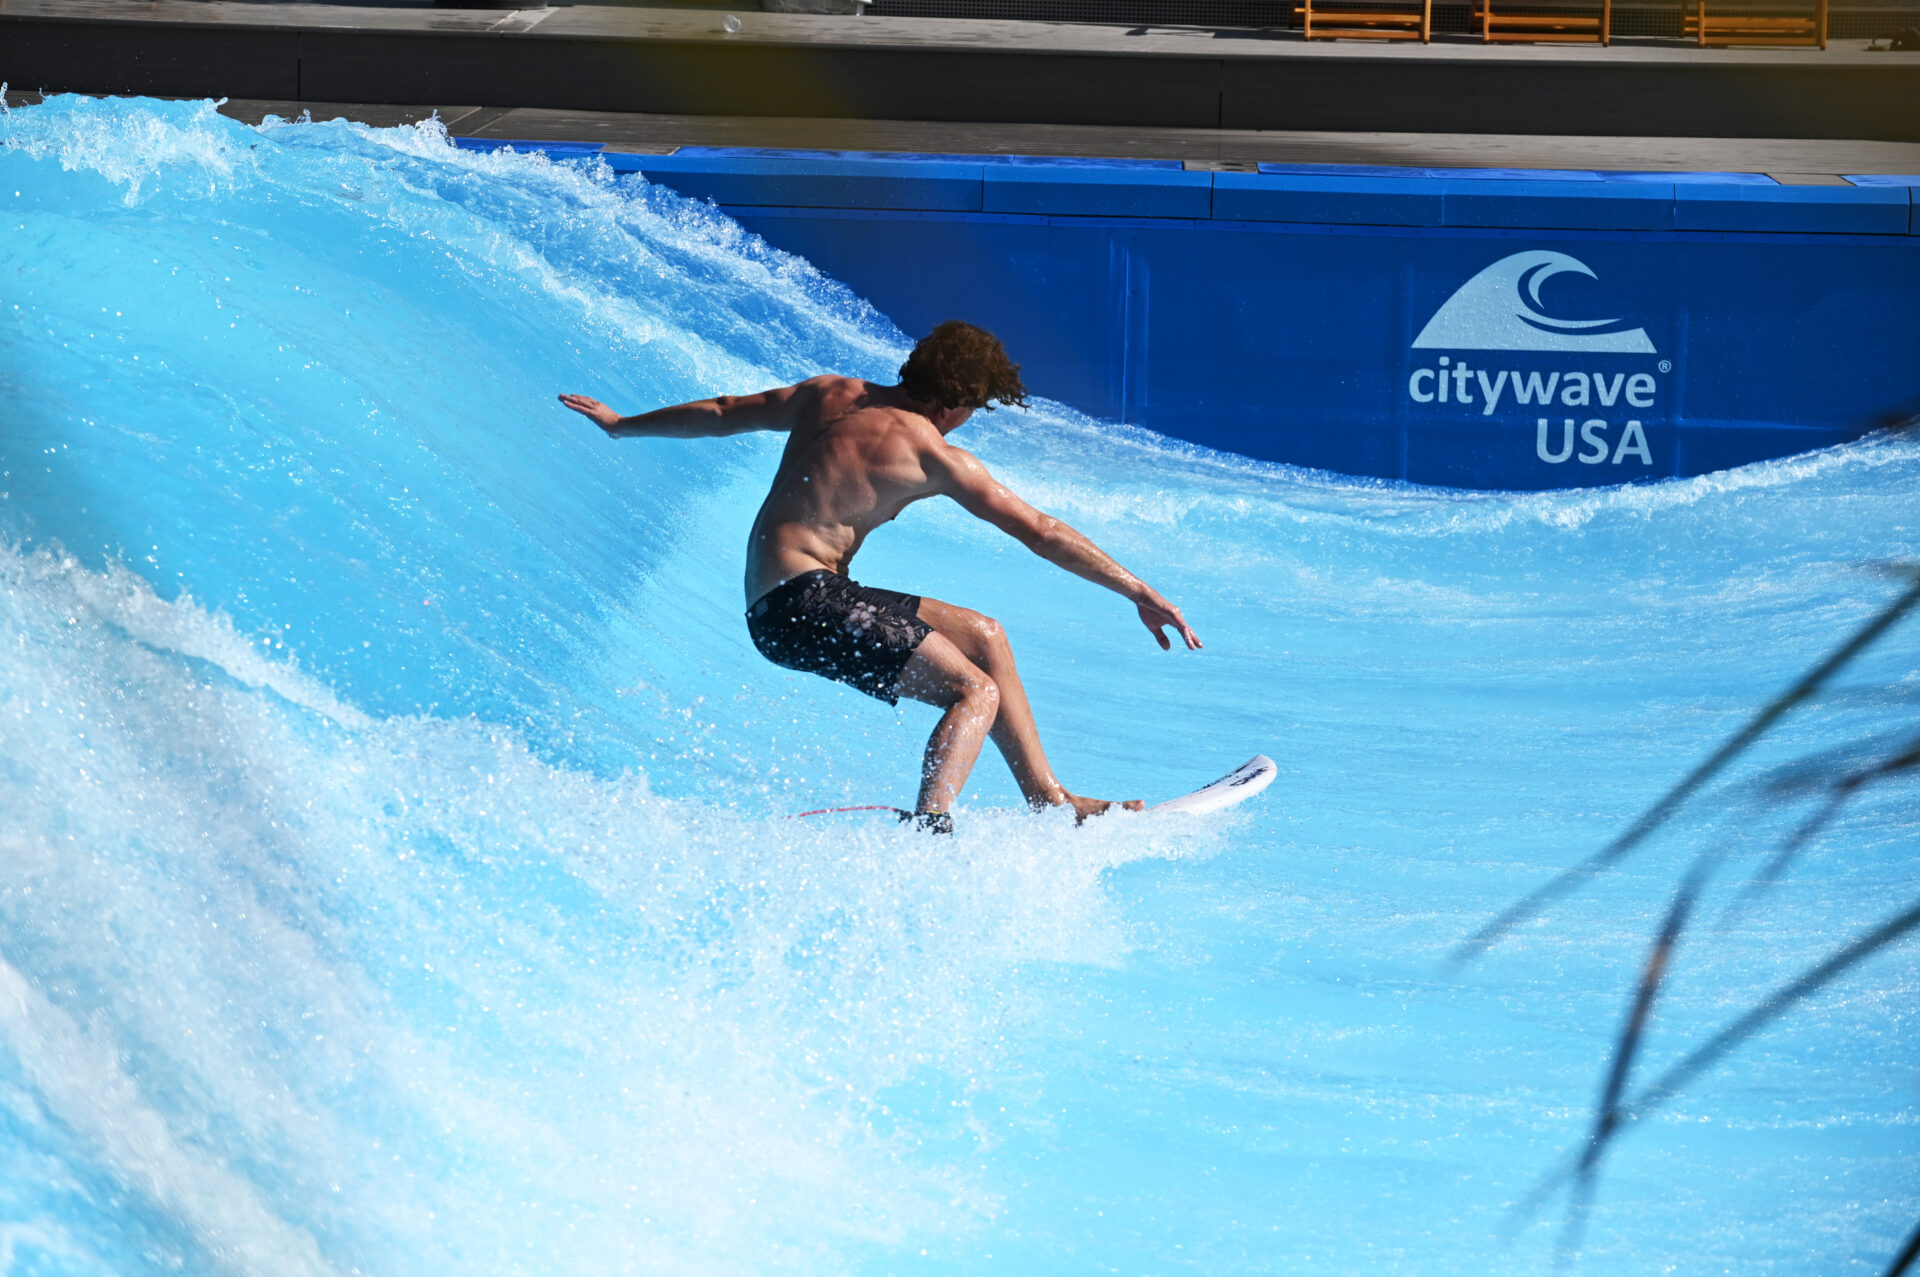 Man surfing a wave at Lakeside Surf at Slidewaters Water Park in Chelan, Washington.